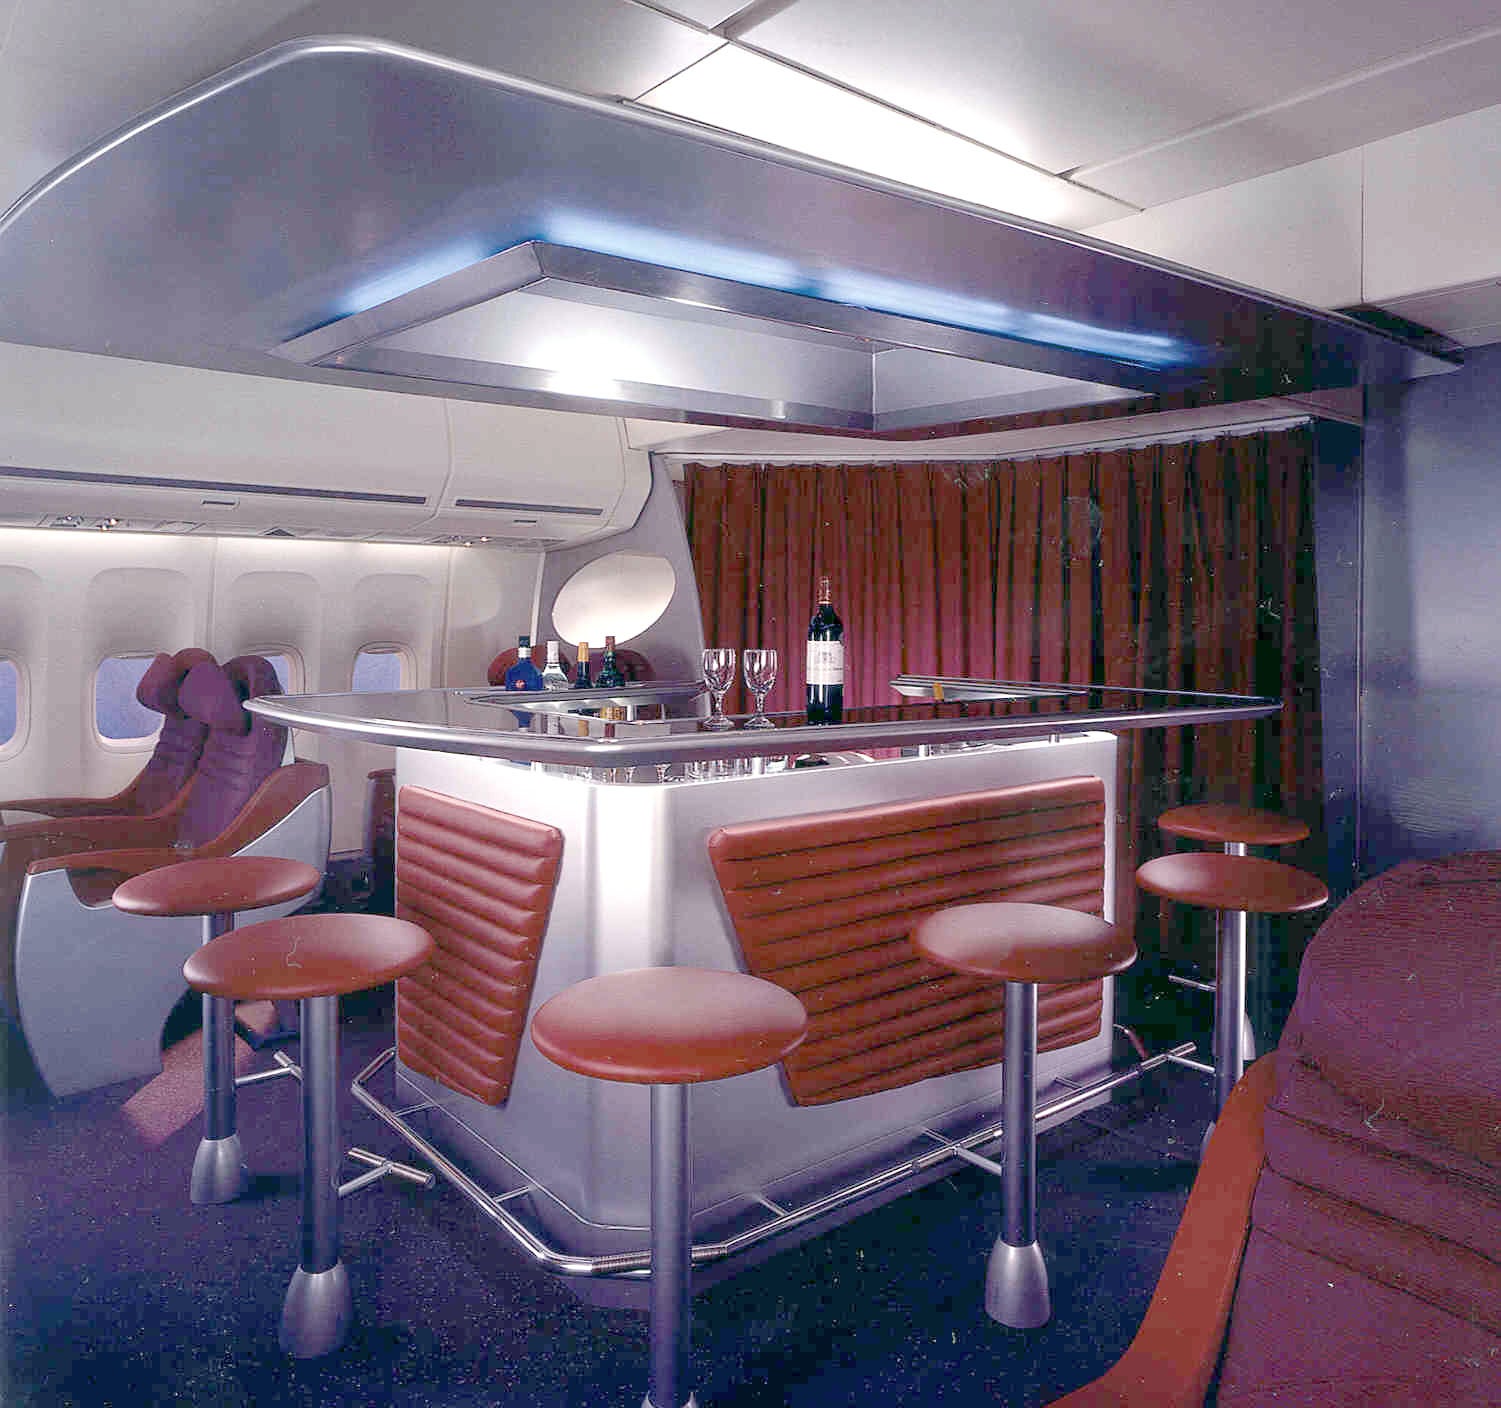 Virgin Atlantic was the first international carrier to offer a bar for passengers